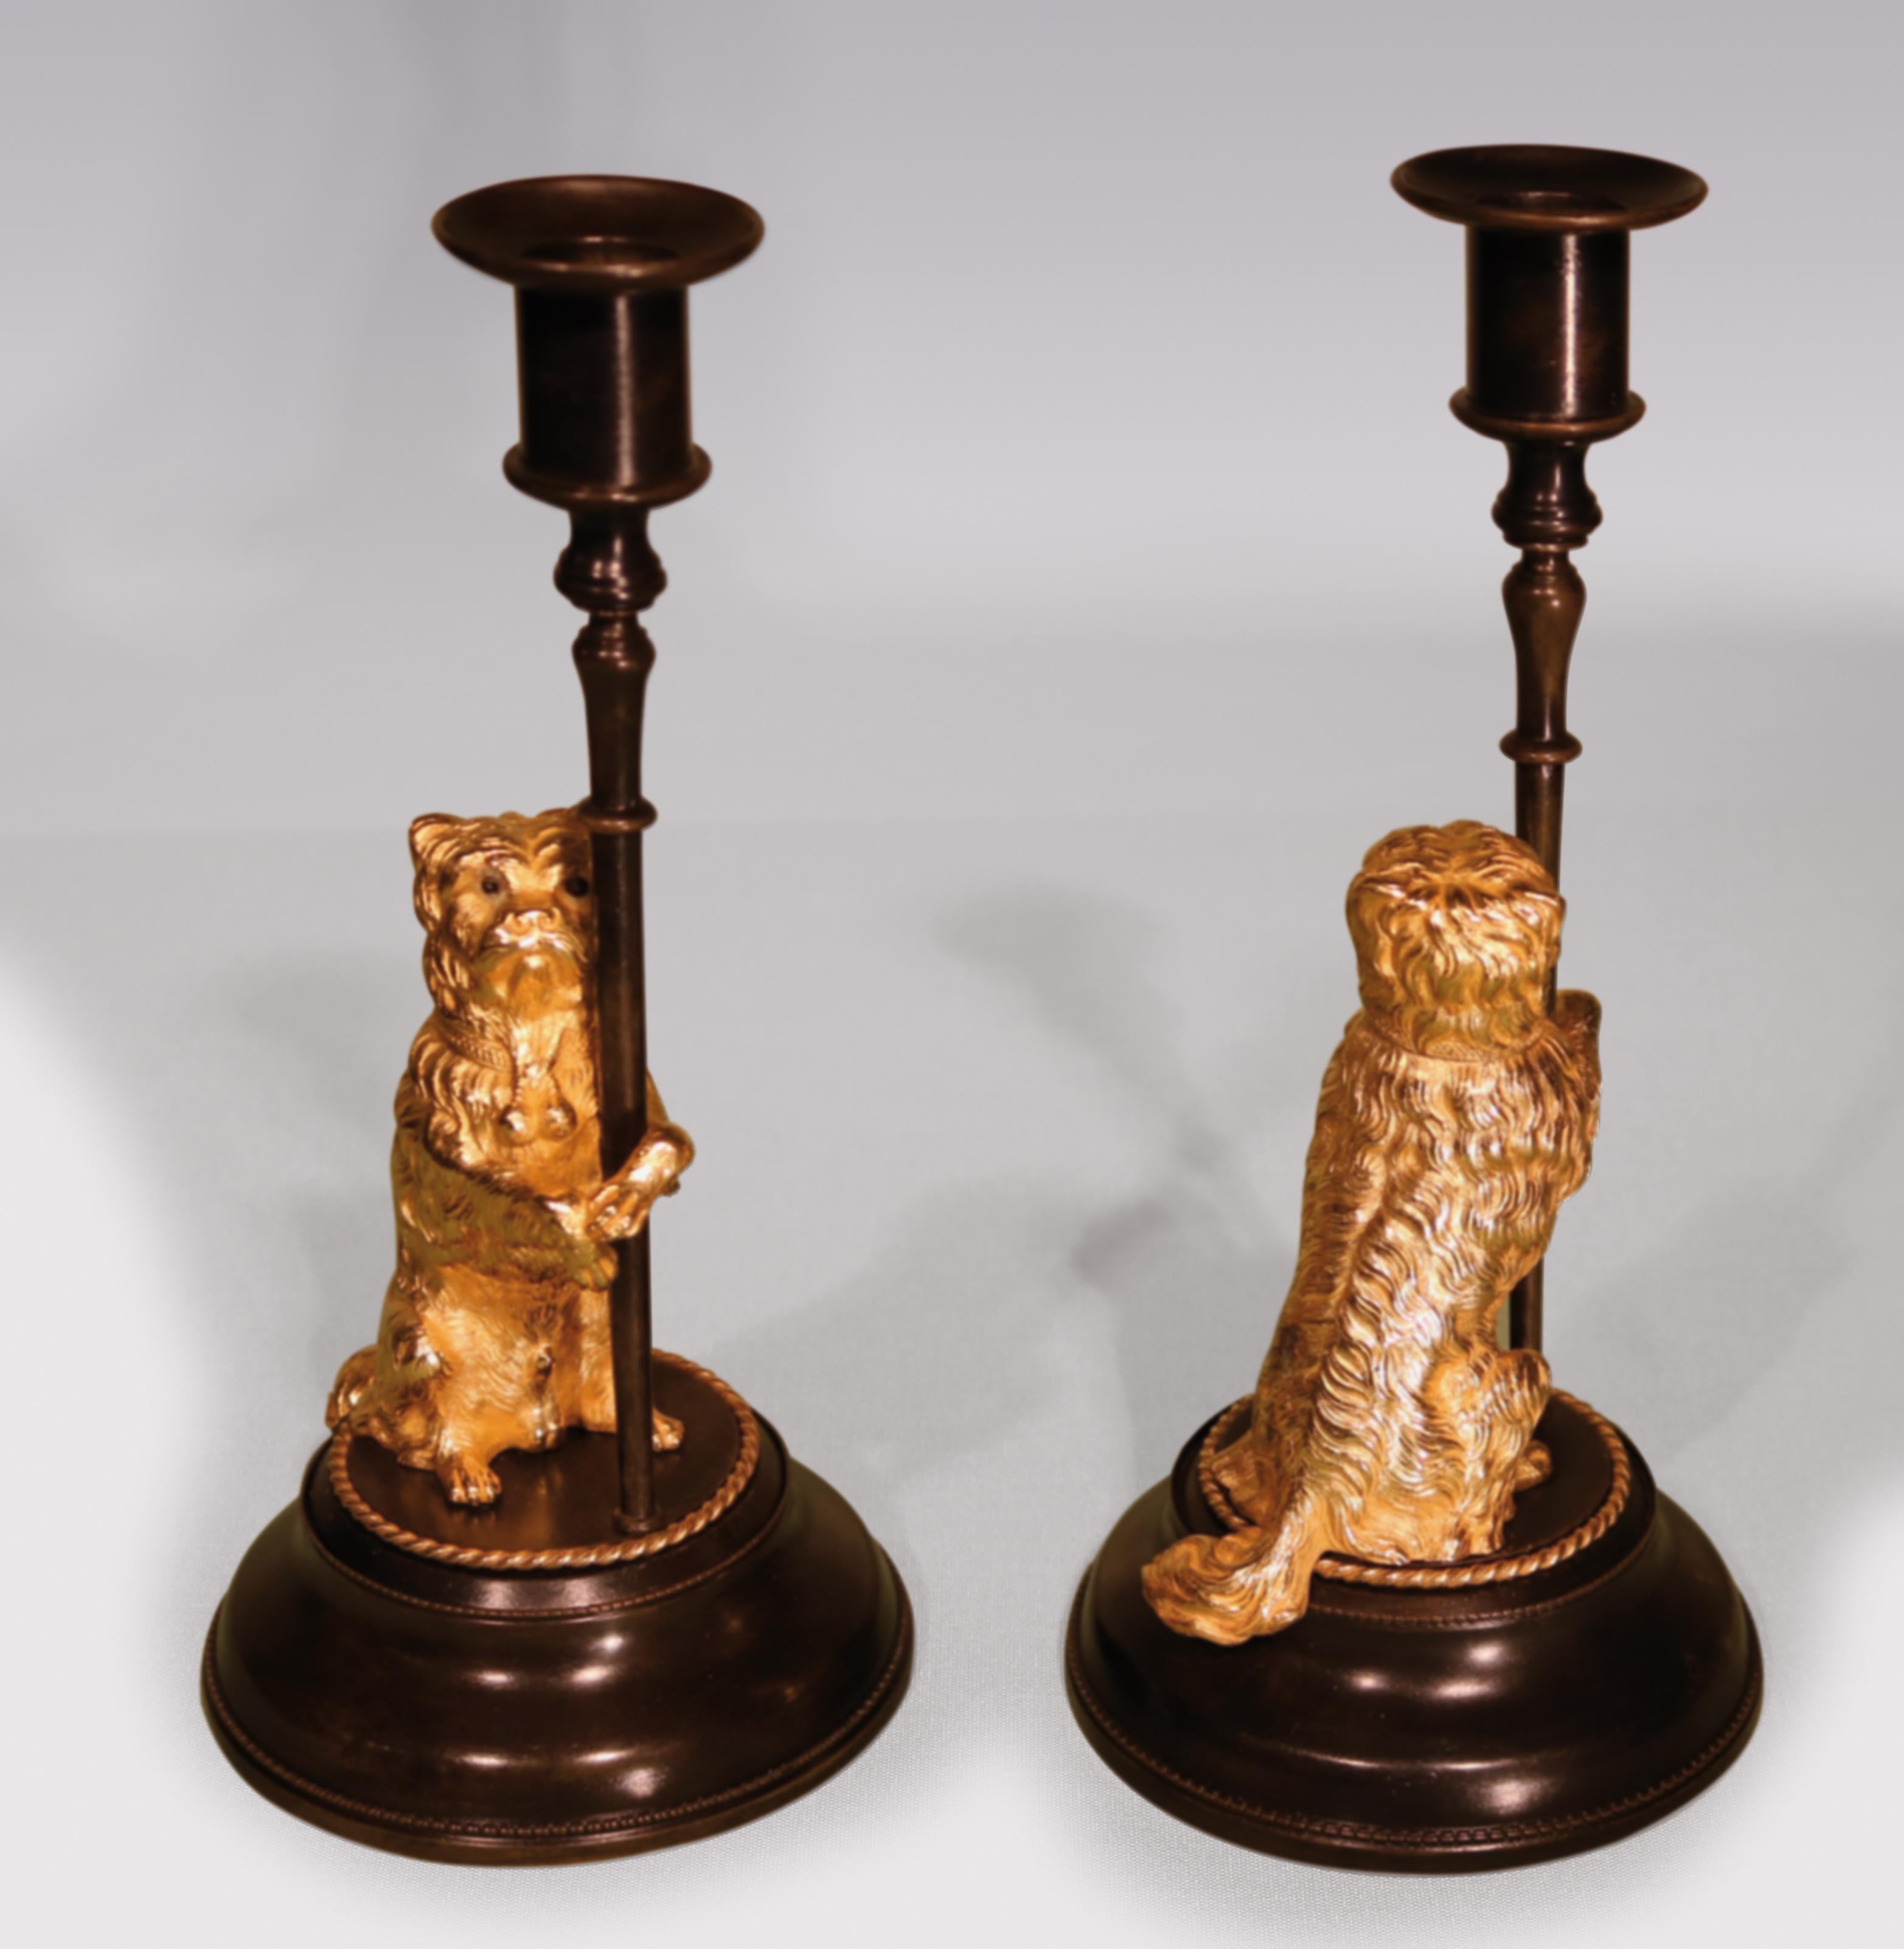 A pair of mid 19th century bronze & ormolu candlesticks in the form of well-cast standing dogs with engine-turned collars, supported on moulded circular bases with beaded decoration.